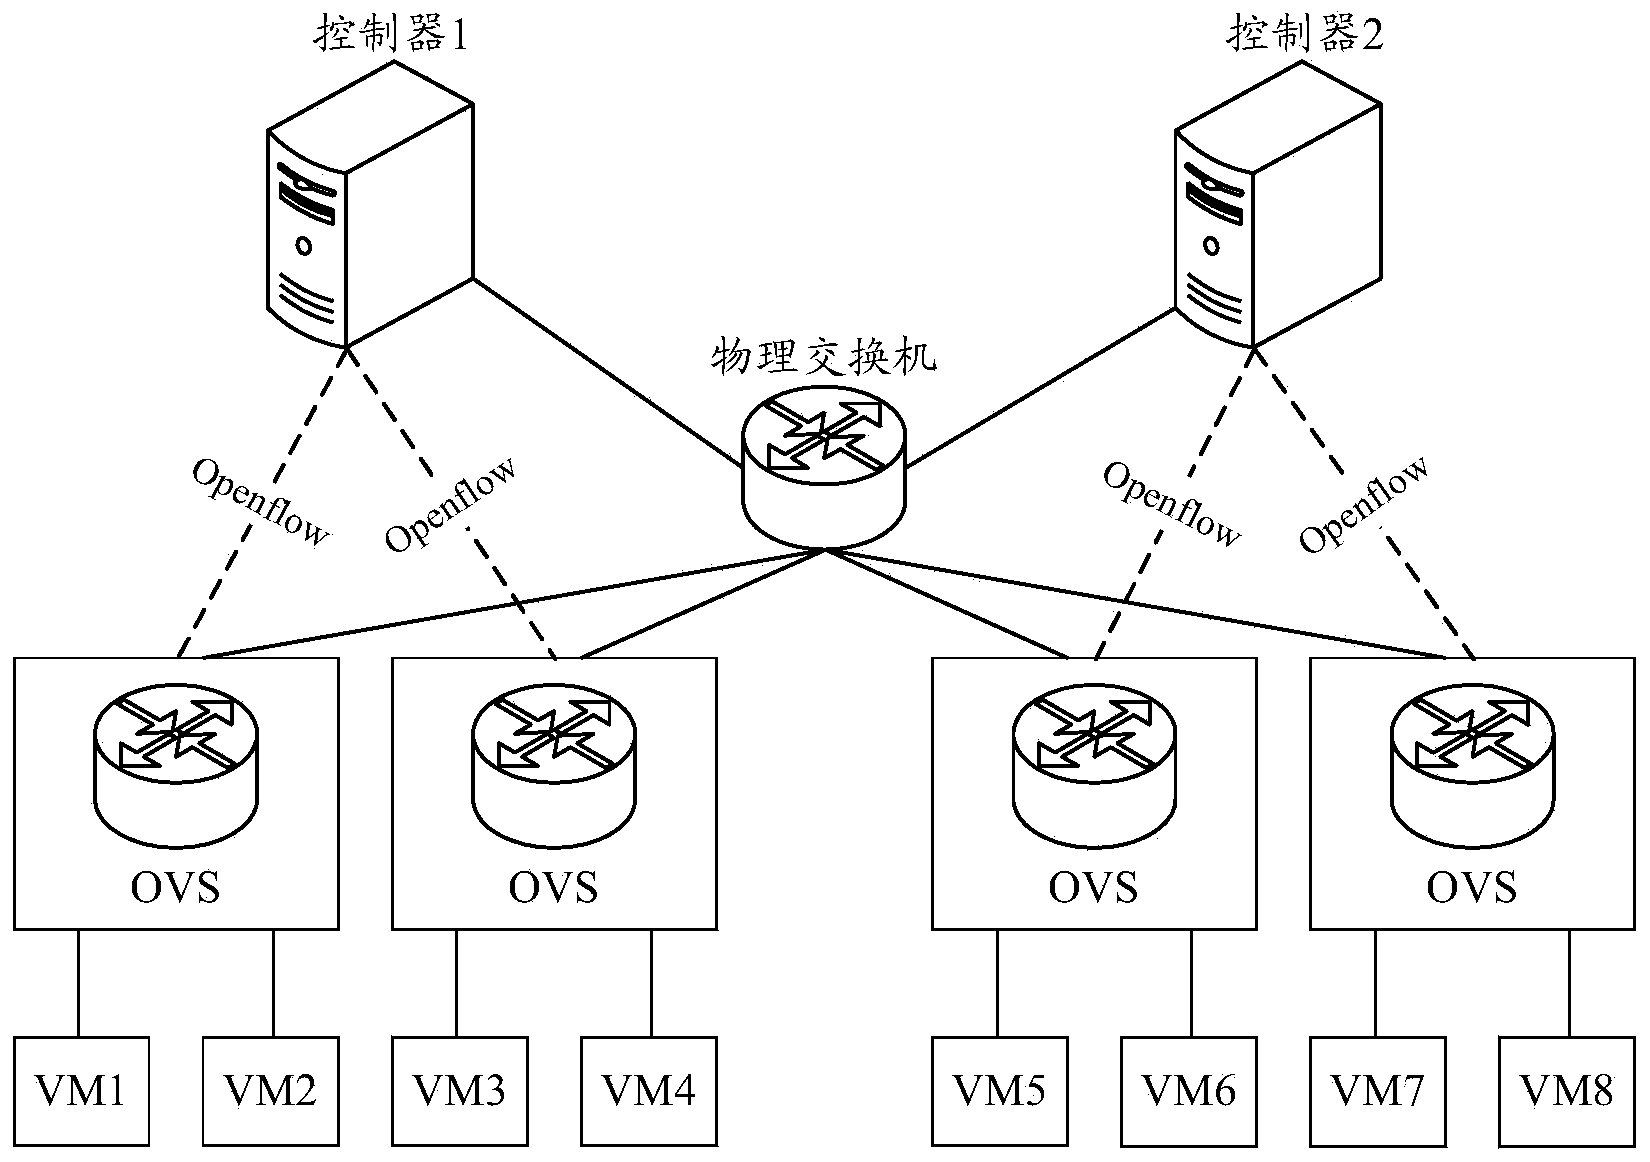 Method and device for allocating IP addresses to virtual machines in software defined network